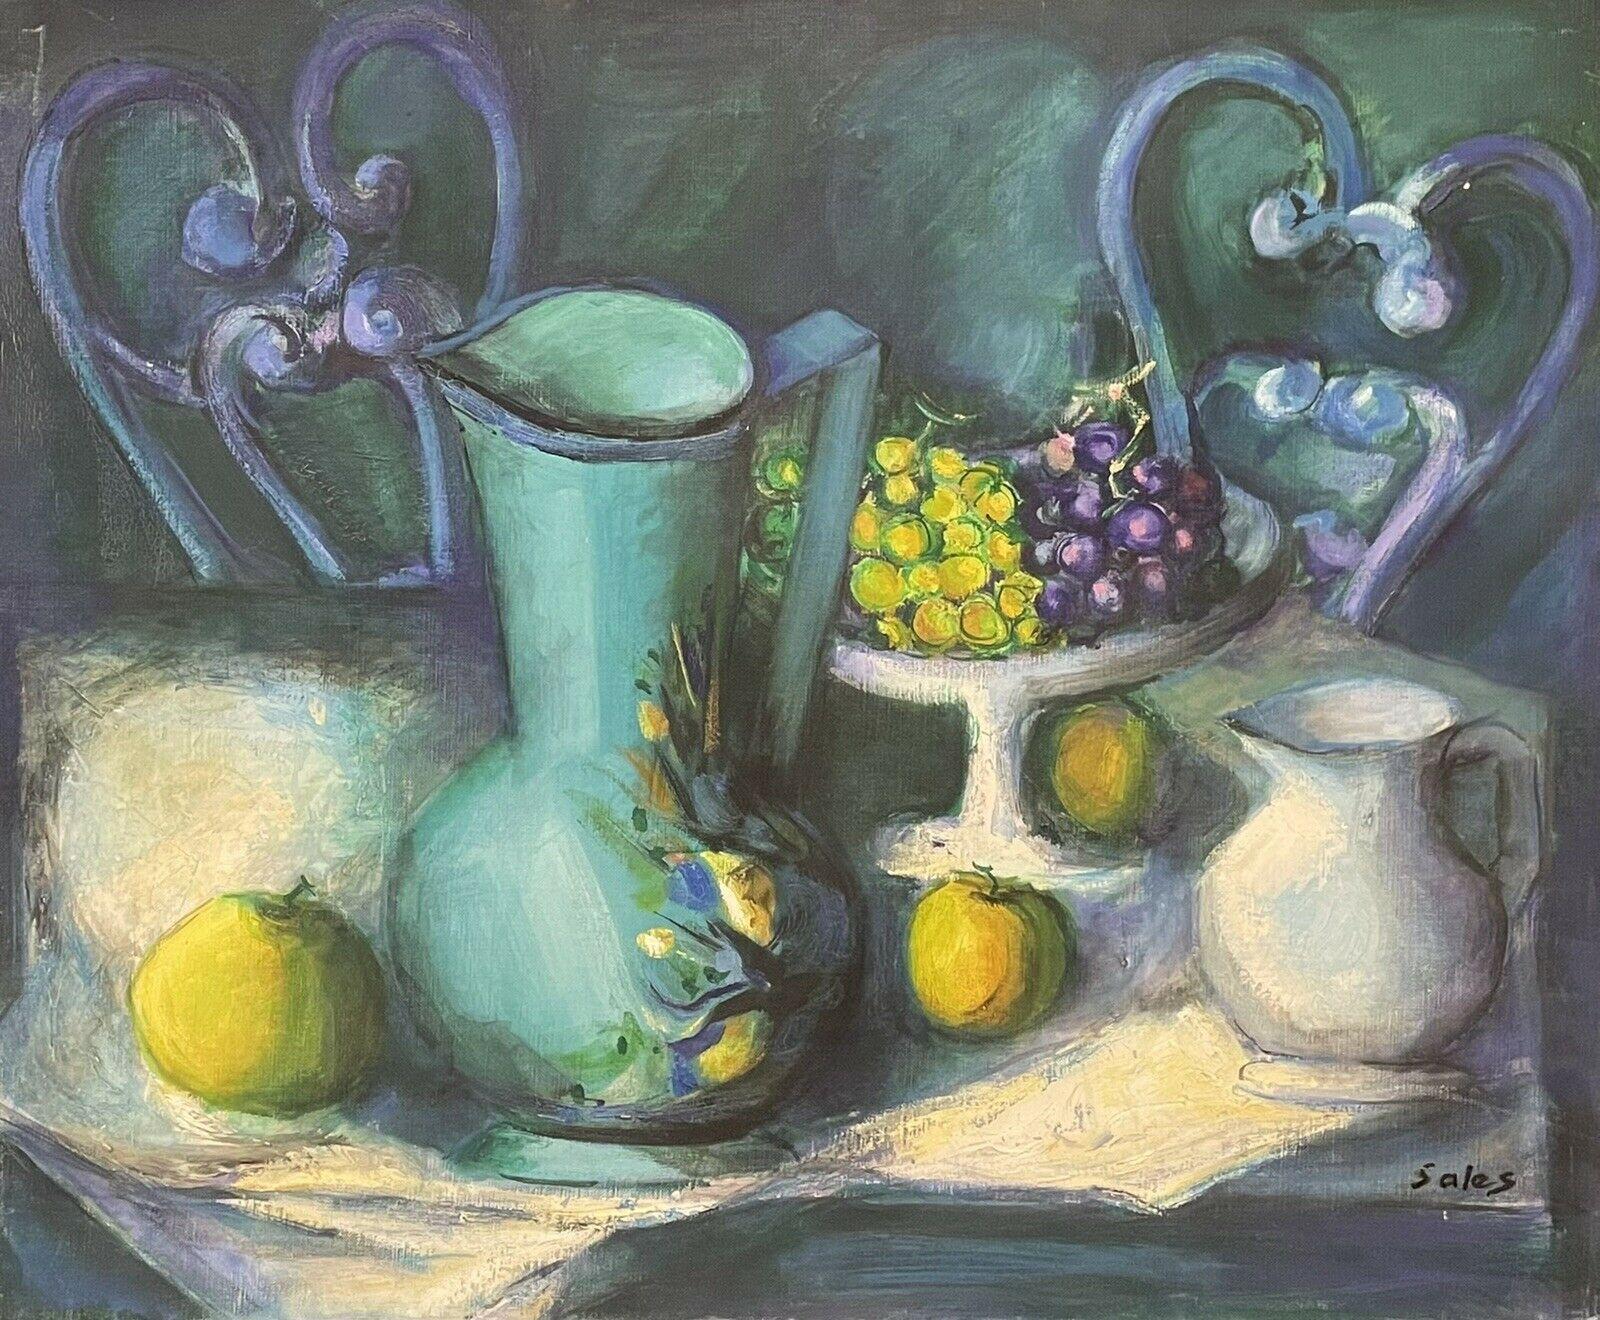 Robert Sales Interior Painting - Signed French Modernist Still Life Oil Painting Beautiful Teal & Yellow Colors